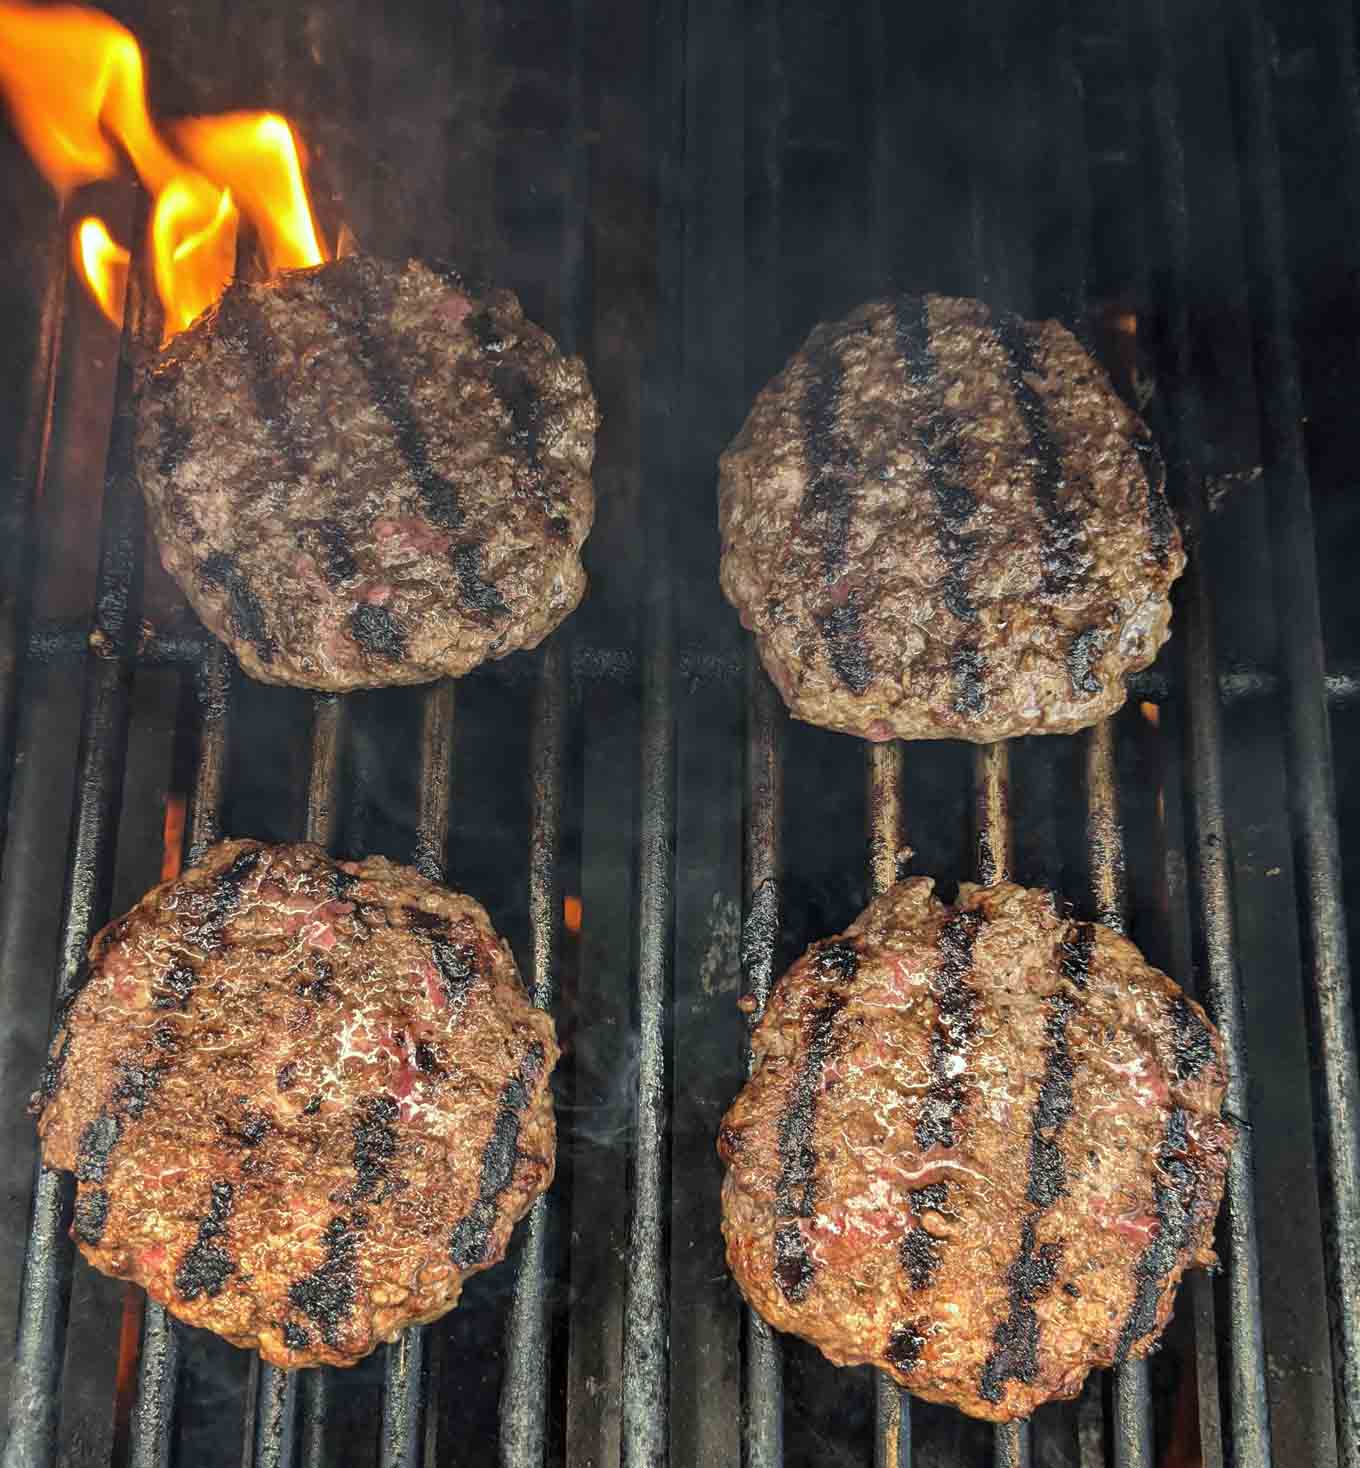 burgers cooking on the grill